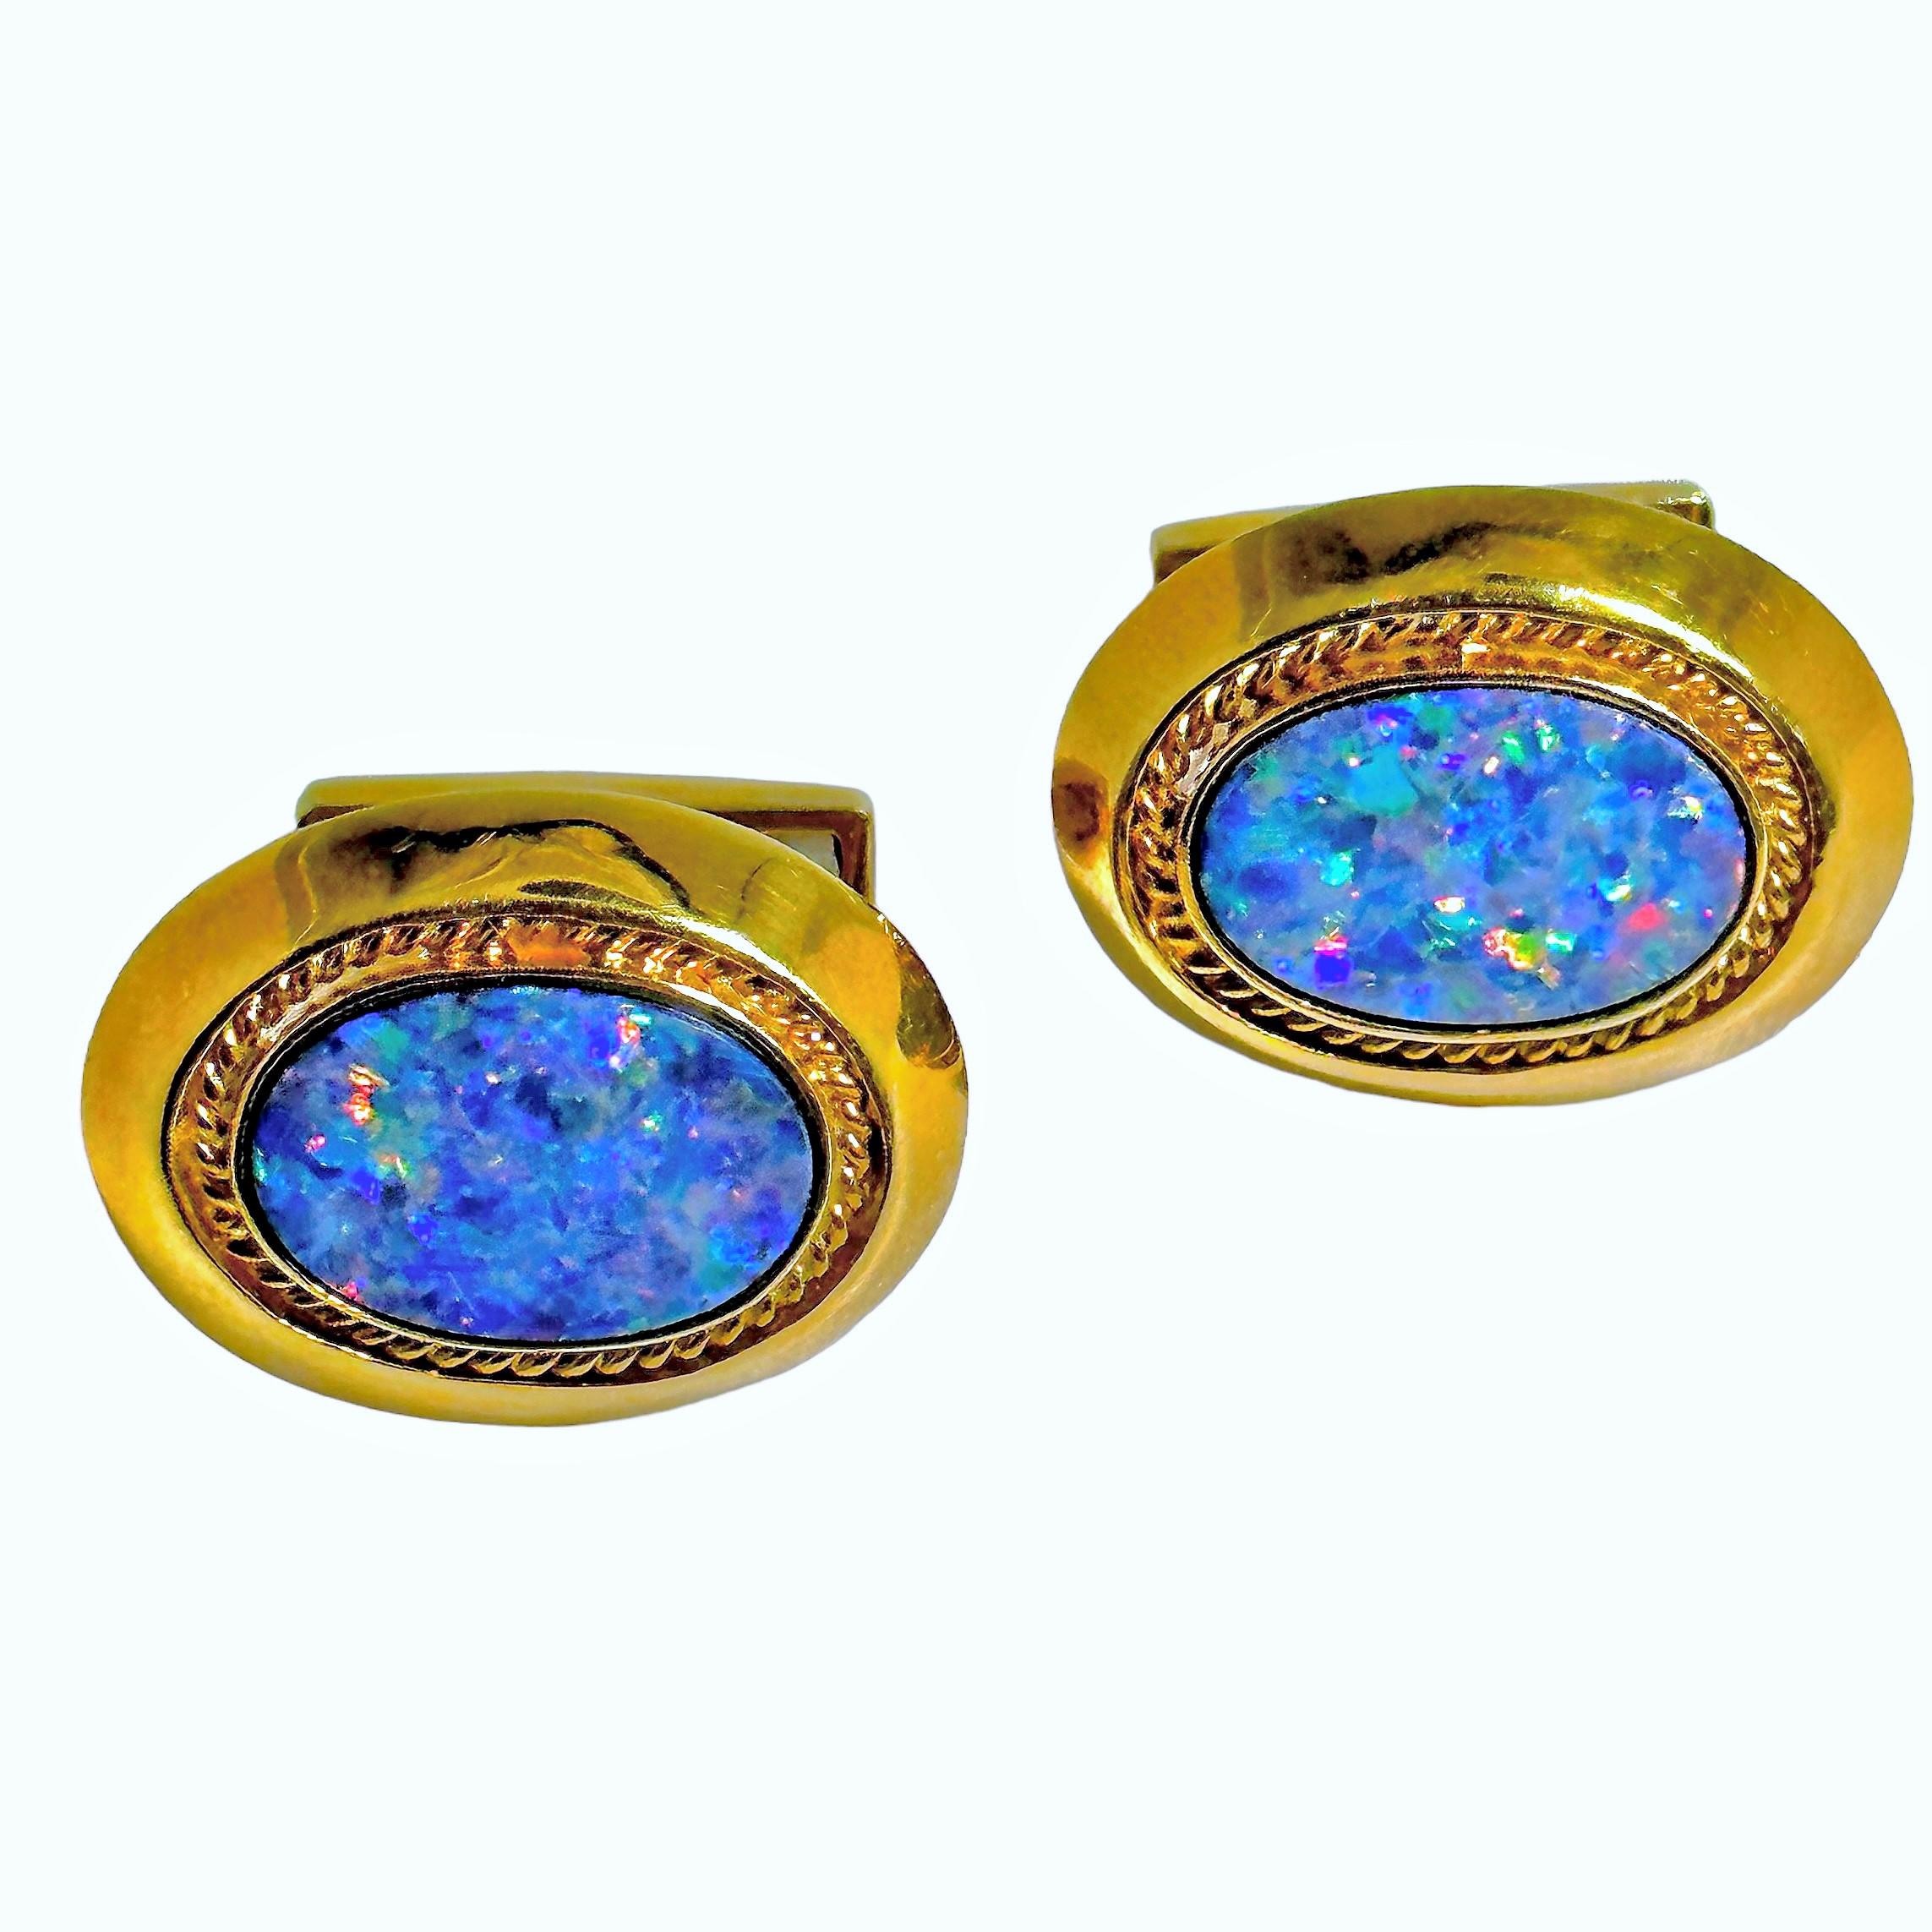 This pair of 18K yellow gold and black opal slab cuff links are absolutely luxurious. Each cuff link measures 1 inch by 3/4 inches and is set with one thin black opal slab, edged with raised rope motif. The pair are stamped 18K and EMIS for the